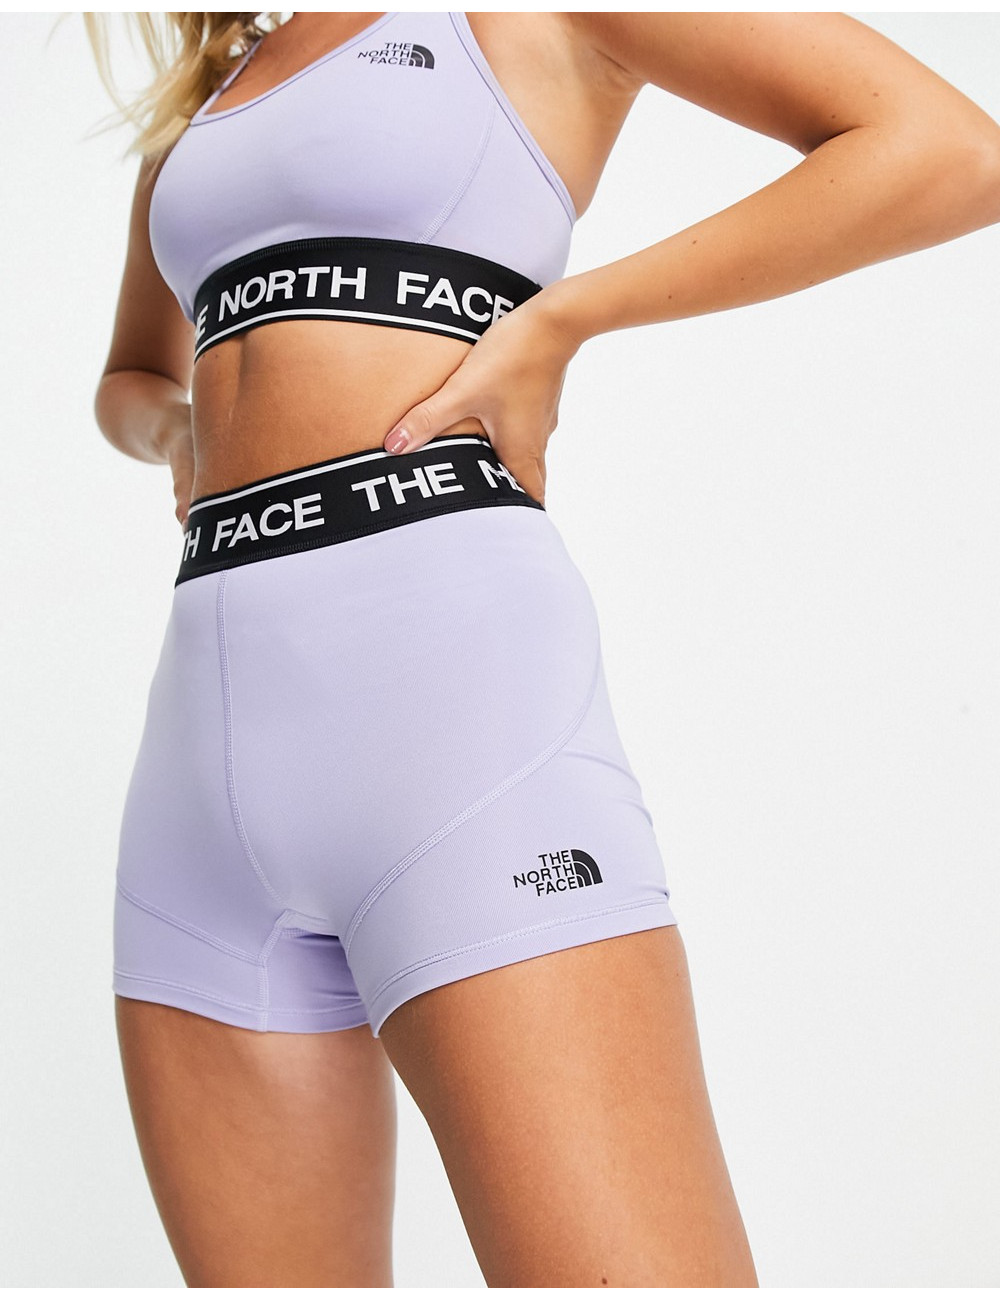 The North Face Bootie short...